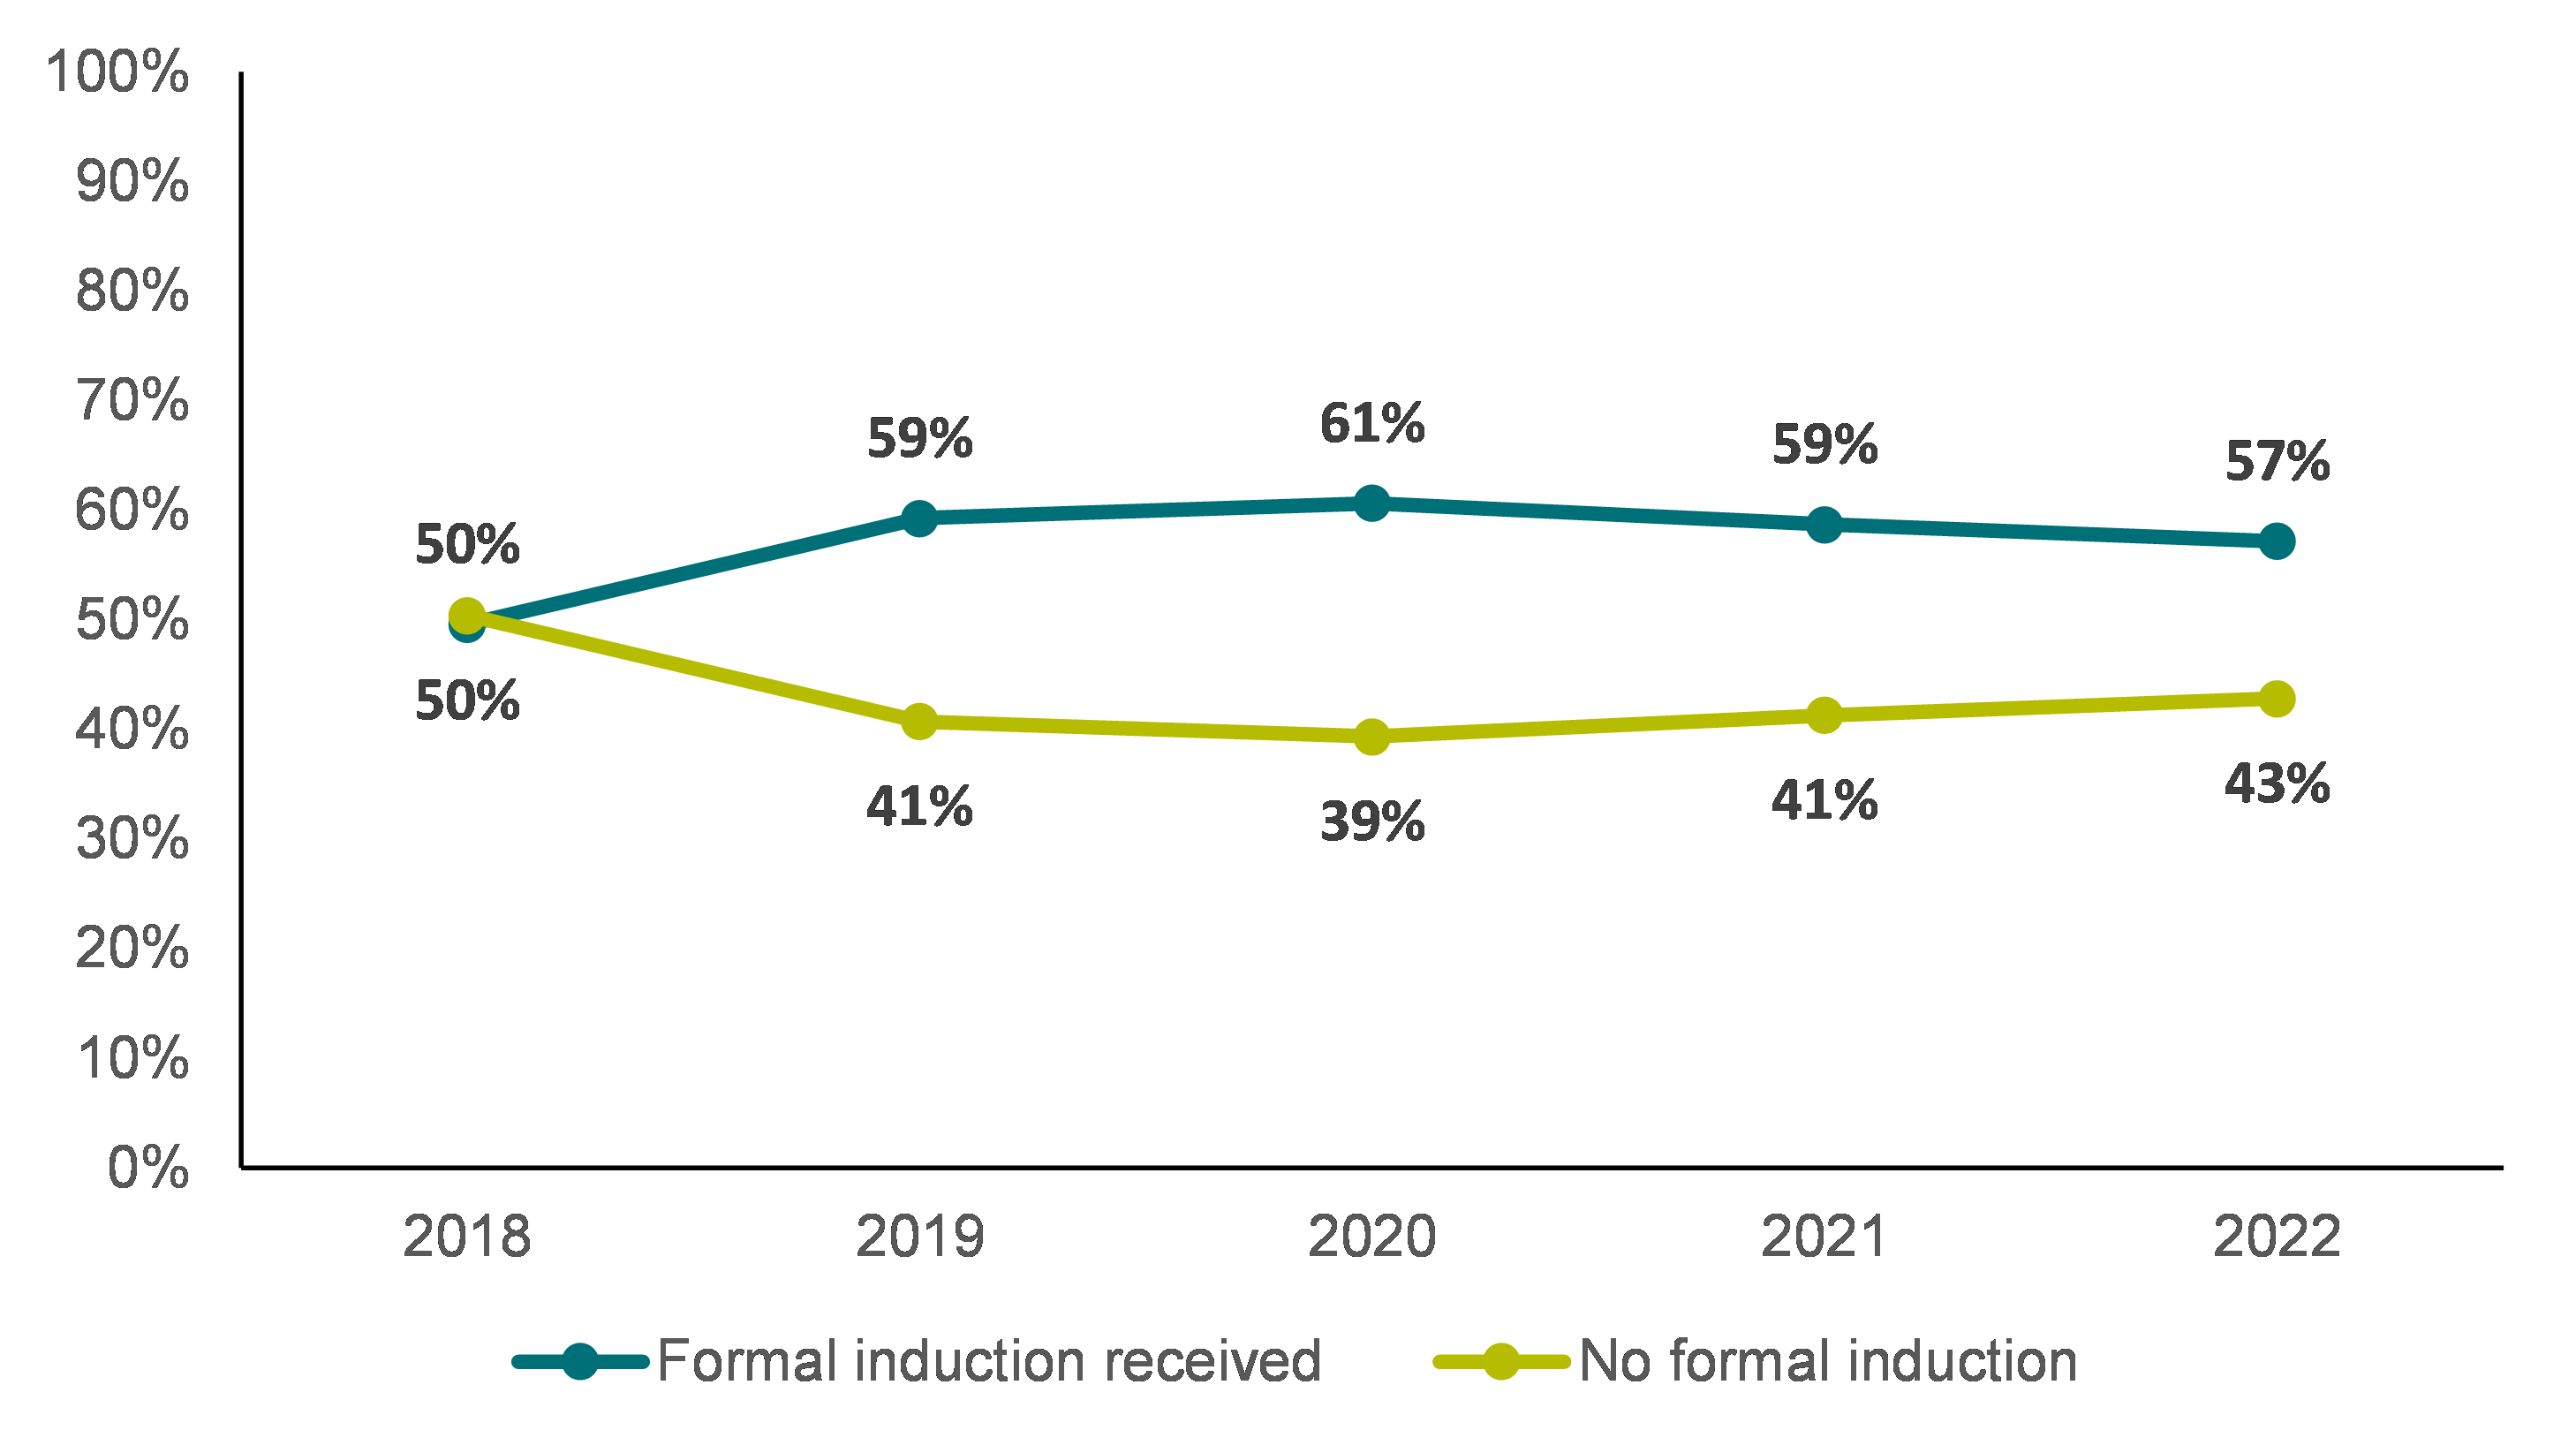 Rates of formal induction by early career stage, 2018 to 2022 (1-2 years of experience)